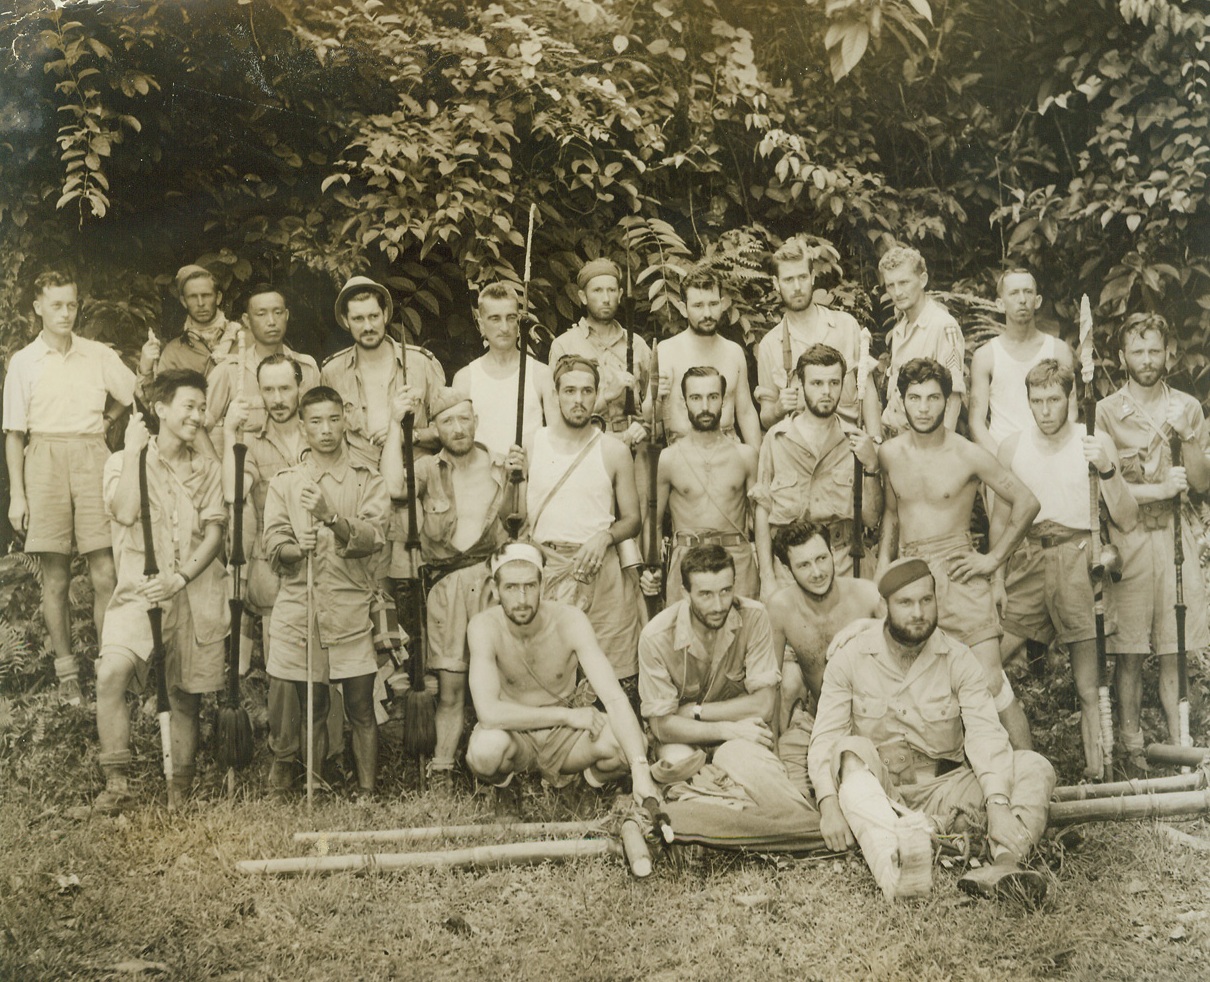 Out of the Jungle, 9/28/1943. India: - The twenty survivors of an ATC plane which crashed in Northern Burma, who participated in a dramatic mass parachute jump to safety when the ship developed engine trouble, August 2, while en route to China from India, are shown with members of a parachuting rescue party upon reaching the safety of India once again.  The complement marched 26 days through dense jungle growth in an area laden with head-hunters.  Left to right, back row: Philip Adams, British sub divisional officer, of ground rescue party; Sgt. E. Wilder, Levelland, Tex.; Col. Wang Pao Chao, Chinese officer; Eric Sevareid, CBS news commentator; William T. Stanton, of Board of Economic Warfare; Sgt.  Joseph E. Clay, Monticello, Ia.; Cpl. Basil M. Lemon, Tulsa, Okla.; Sgt. Glen A. Kittleson, Ballantine, Mont.; Sgt. Francis W. Signor, Yonkers, N.Y., and Cpl. Lloyd J. Sherrill, Burlington, Ia. Middle row:- Lt. Roland K. Lee, Hicksville, Long Island, N.Y.; Lt. Col. Kweh Li, Chinese Army; John Davies, of State Department; Sgt. Ned C. Miller (crew chief), Ottumwa, Ia.; Flight officer Harry K. Neveu, pilot of the ship, Cudahy, Wisc.; Sgt. Joseph J. Gigore, Auburn, Mich., (first name etc is illegible) Schrandt, Philadelphia, Pa.; Cpl. Edward Holland, Cleveland, Ohio; Cpt. S. Waterbury, Blue Hill, Nebr.; Capt. D.C. Lee, Haddon, Ia., of adjutant General’s office.  Kneeling, Sgt. Richard Passey, Provo, Utah, Lt. Col. Don D. Flickinger, ATC flight surgeon, and Cpl. William G. McKenzie, Detroit, Mich., the trio who jumped from rescue plane to aid crash victims.  In front on stretcher is Sgt. Walter R. Oswalt (radio operator), of Ansonia, Ohio, who broke a leg when he parachuted from stricken plane.  He was carried for 26 days by natives before reaching civilization.  Credit (photo by Frank Cancellare, War Pool photographer, from ACME;